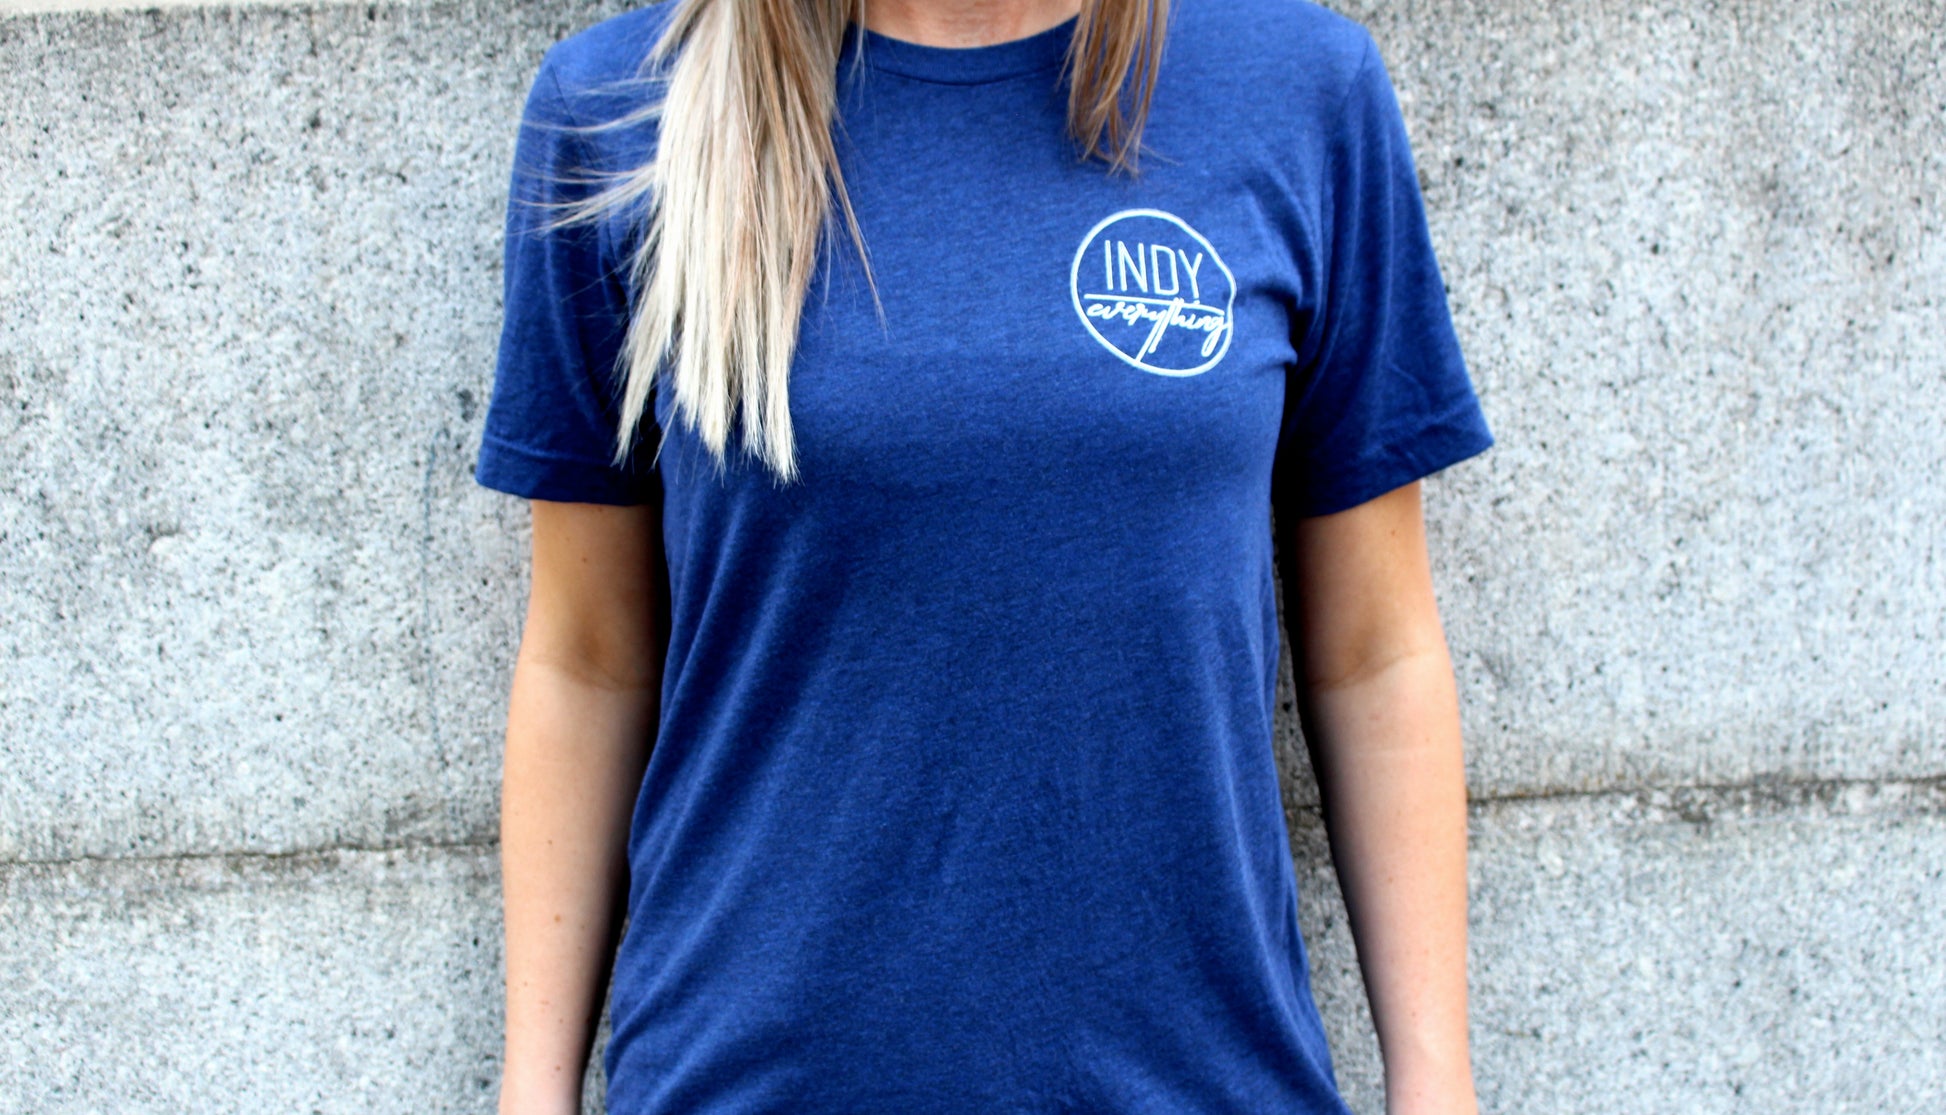 THE PAGODA TEE - Indy Over Everything